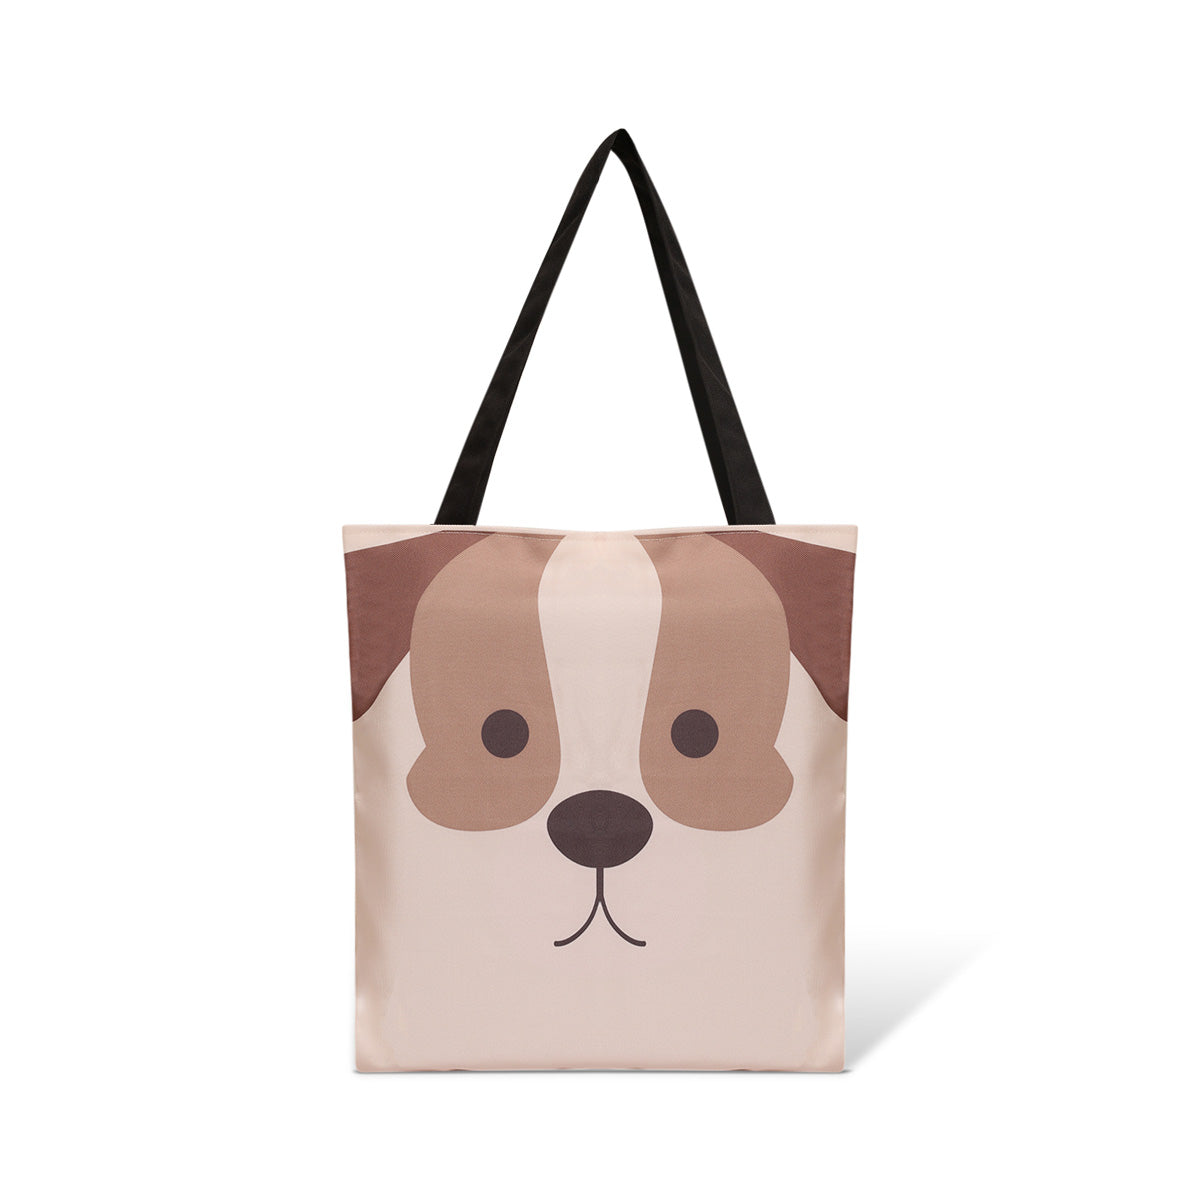 A tote bag featuring a cute dog face design, perfect for animal lovers.